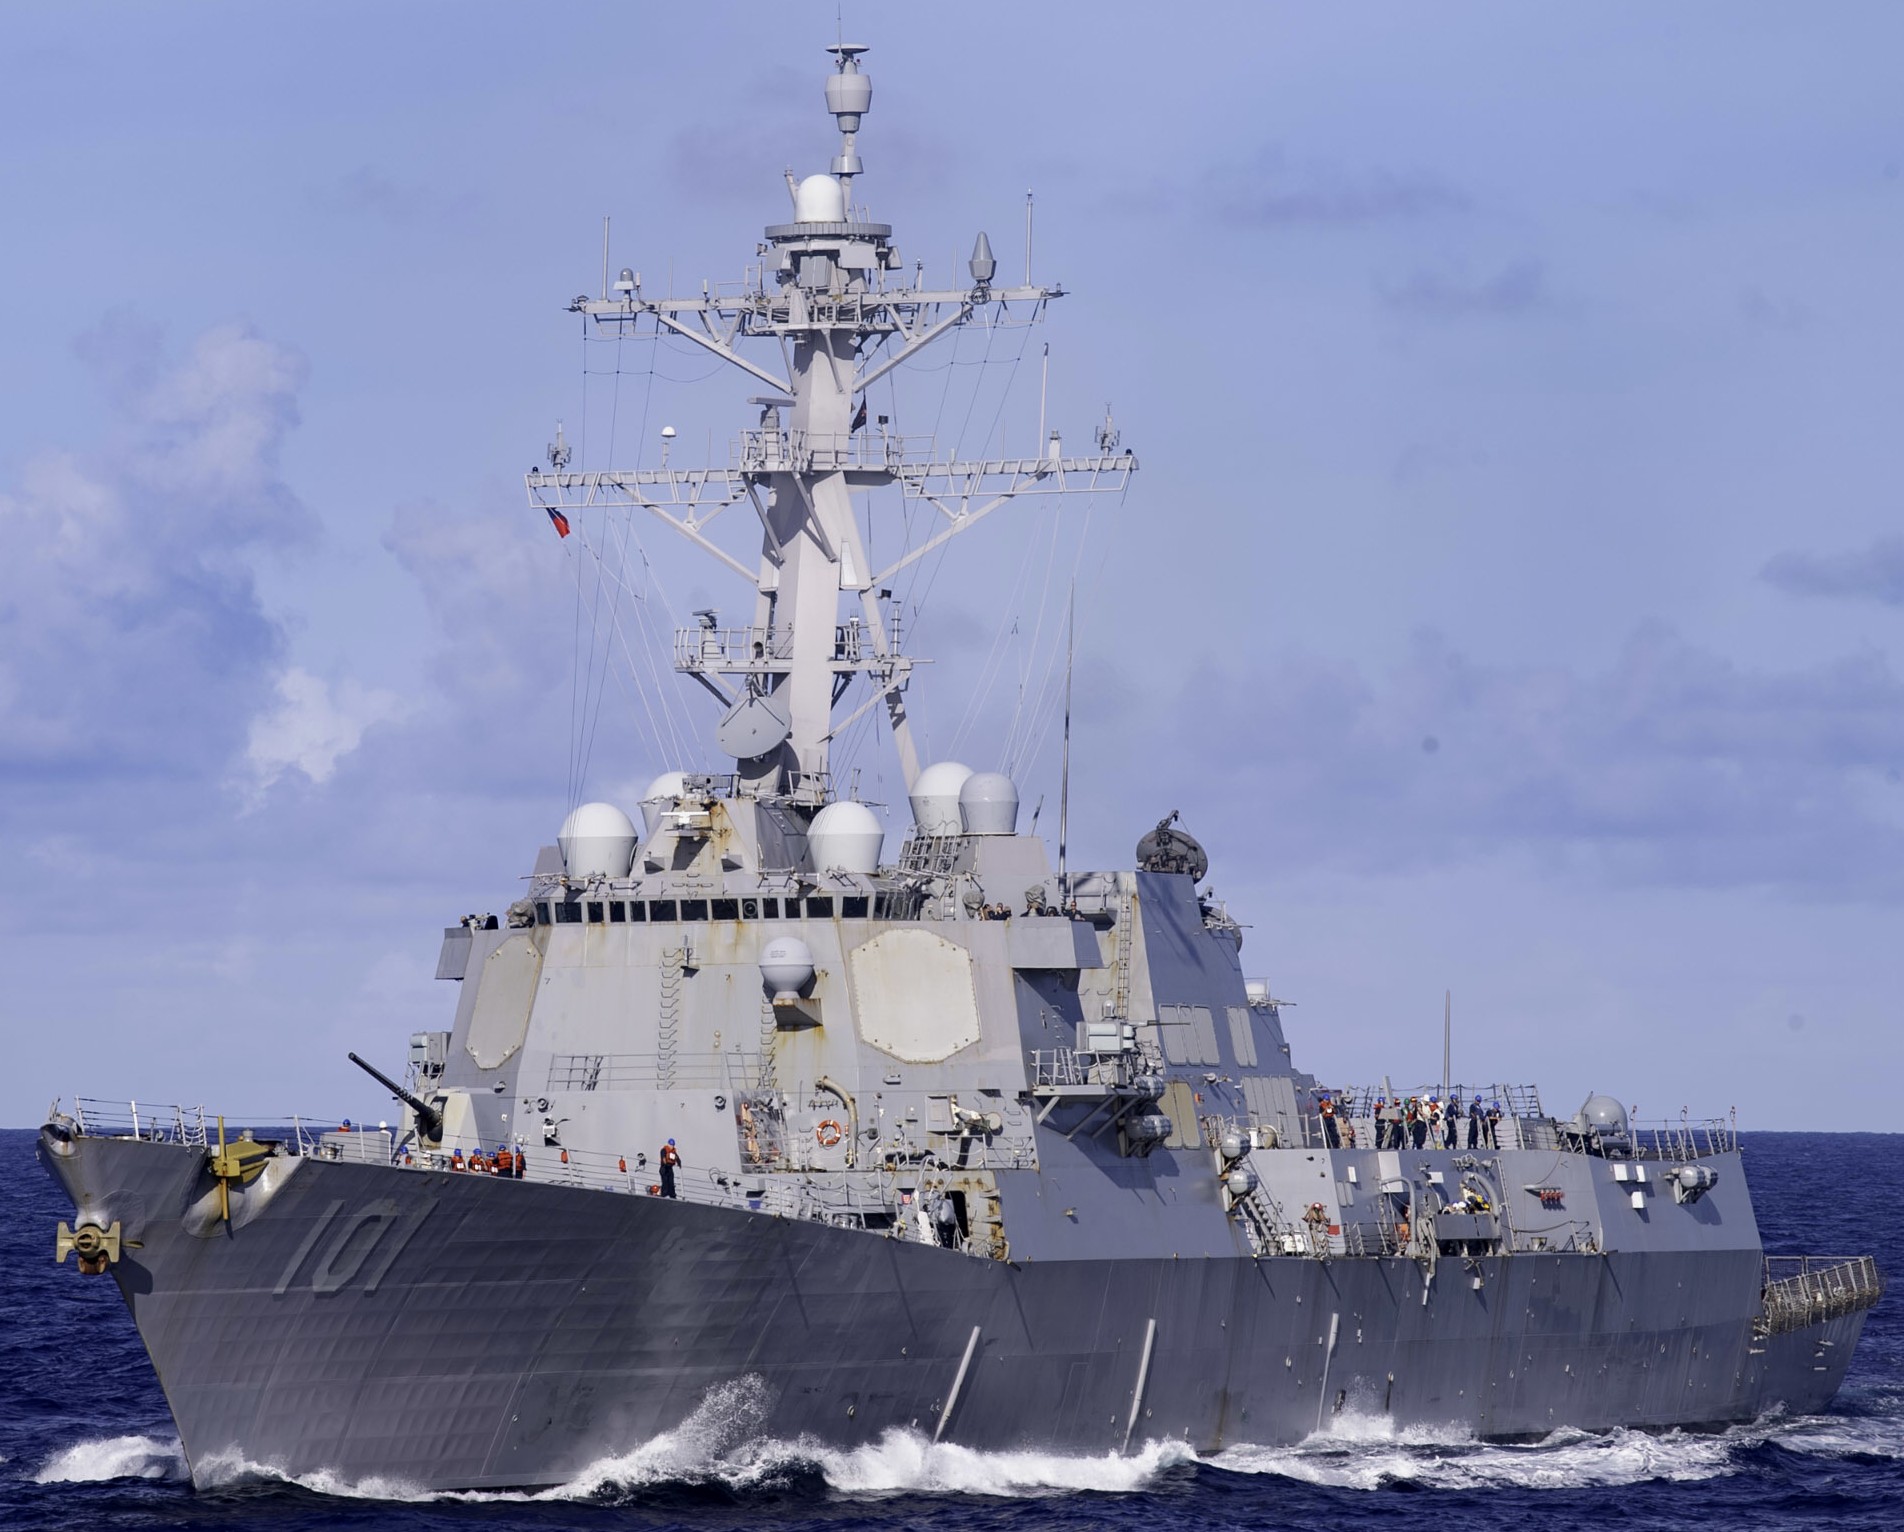 ddg-101 uss gridley arleigh burke class guided missile destroyer aegis us navy pacific ocean 79